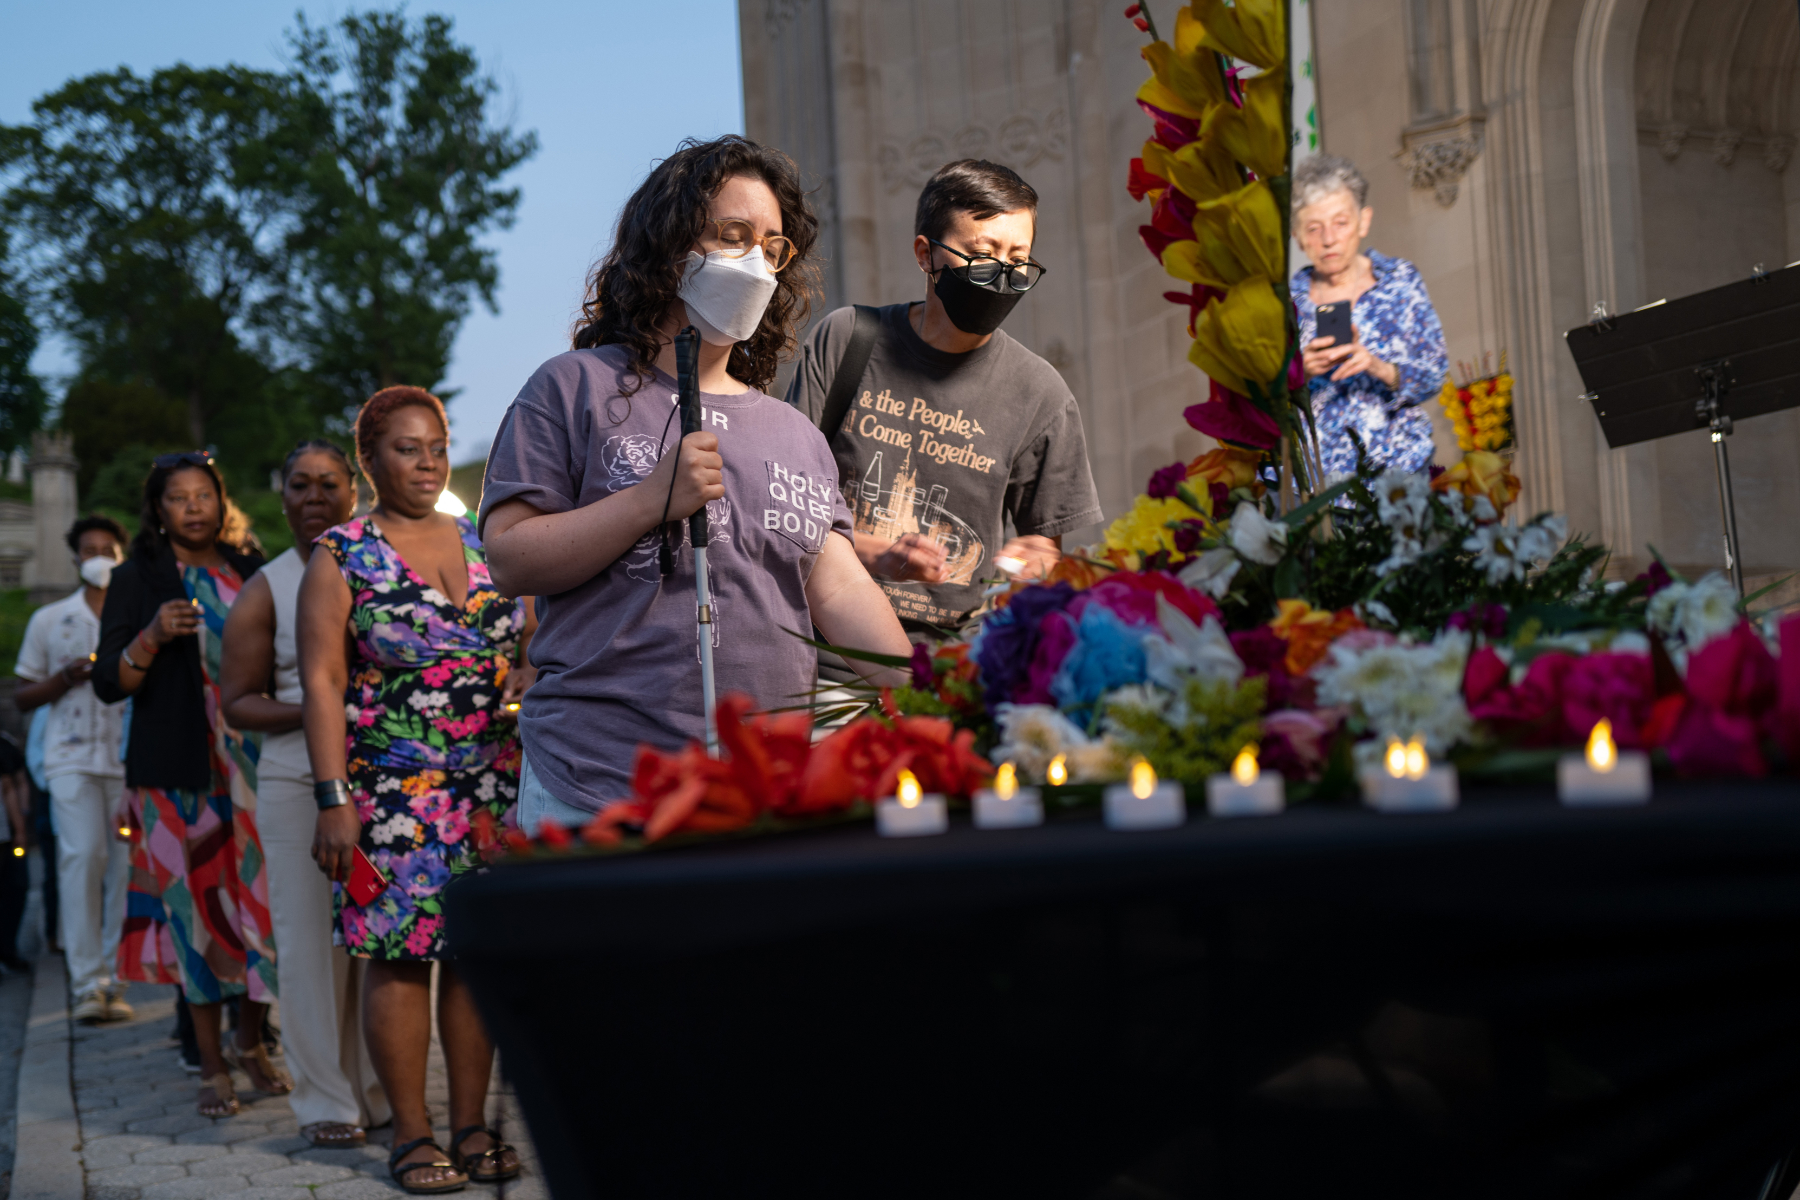 A woman holding a cane and a man in glasses, both wearing masks, are at the head of a line to put candles on a flower-covered memorial table in New York.